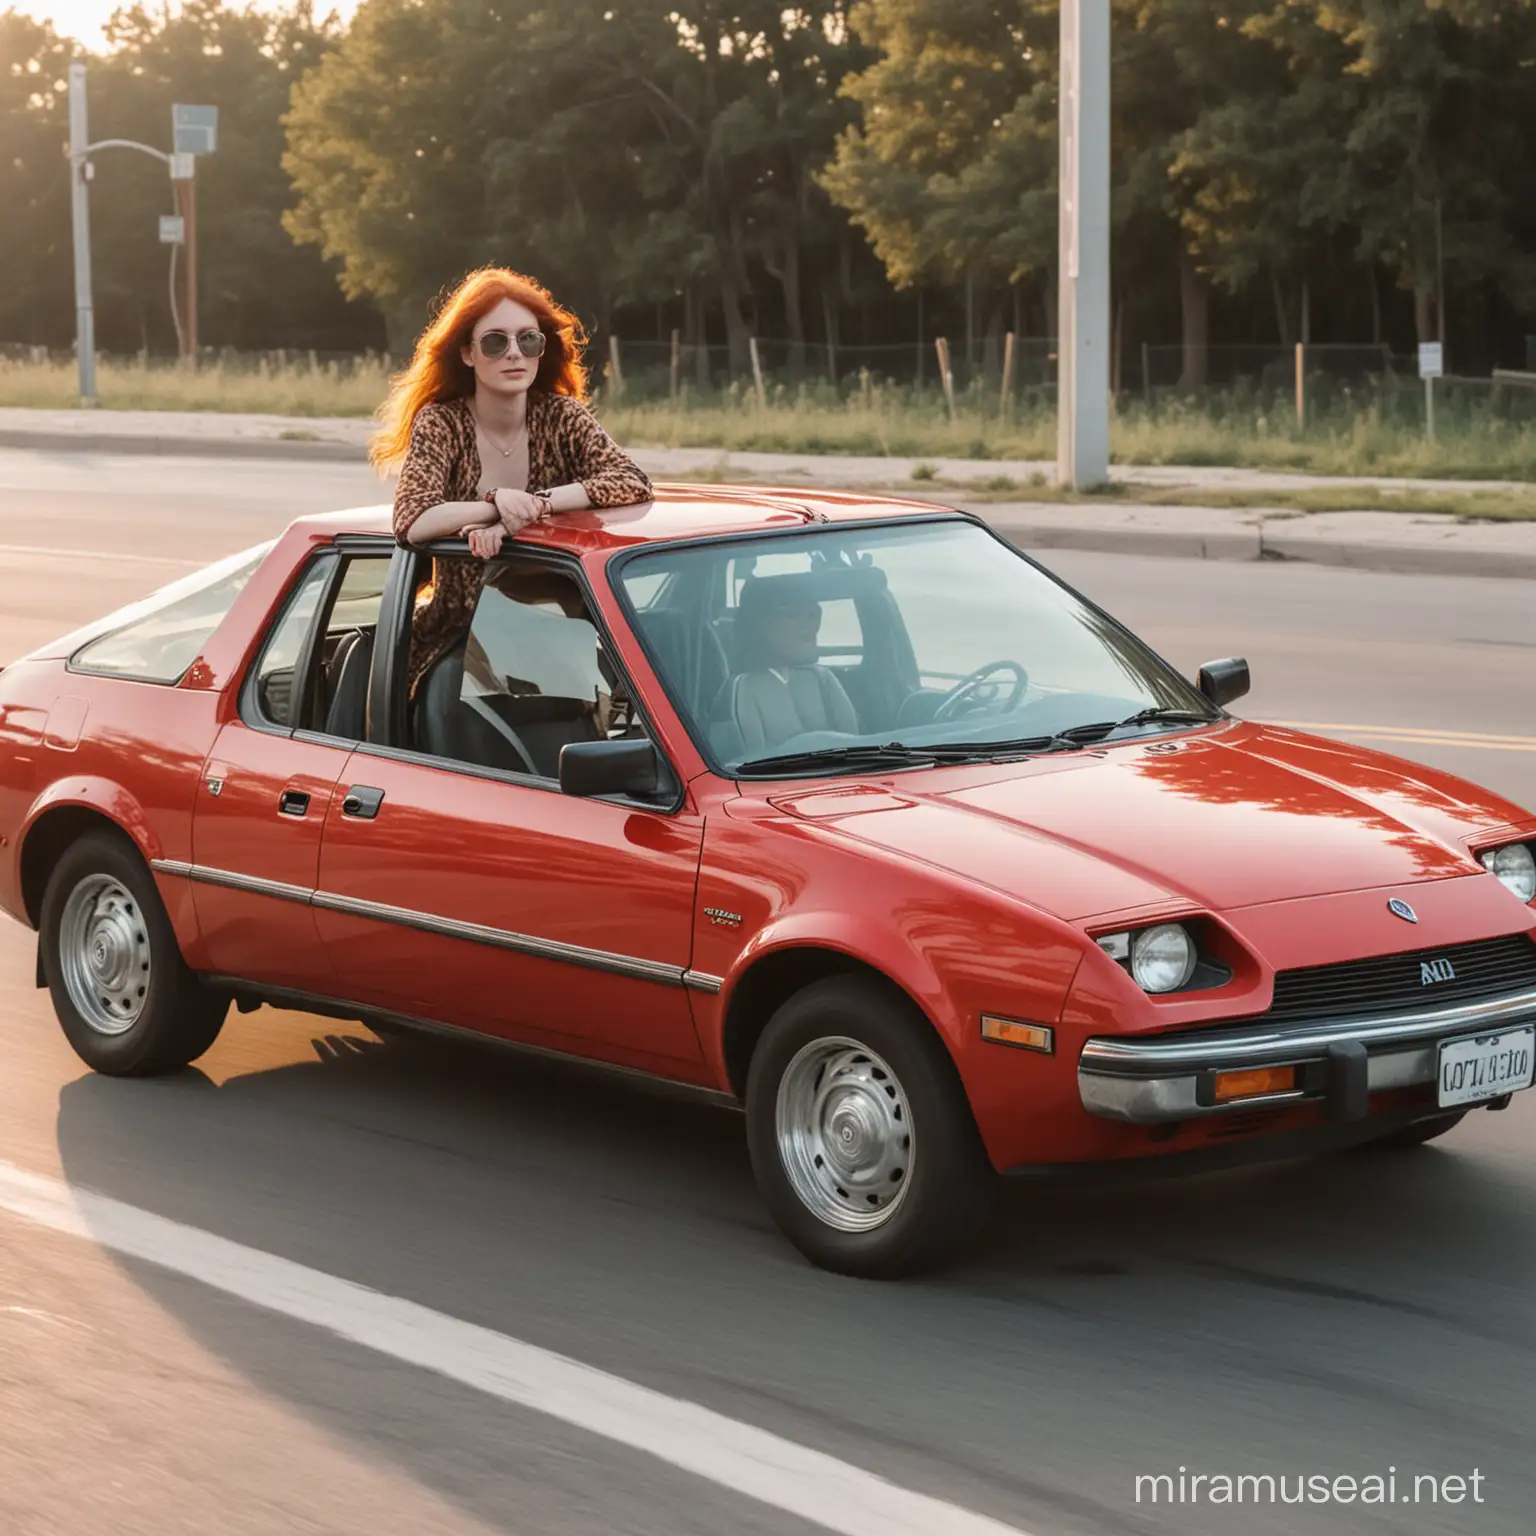 Redhead Driving in a Vintage AMC Pacer Car